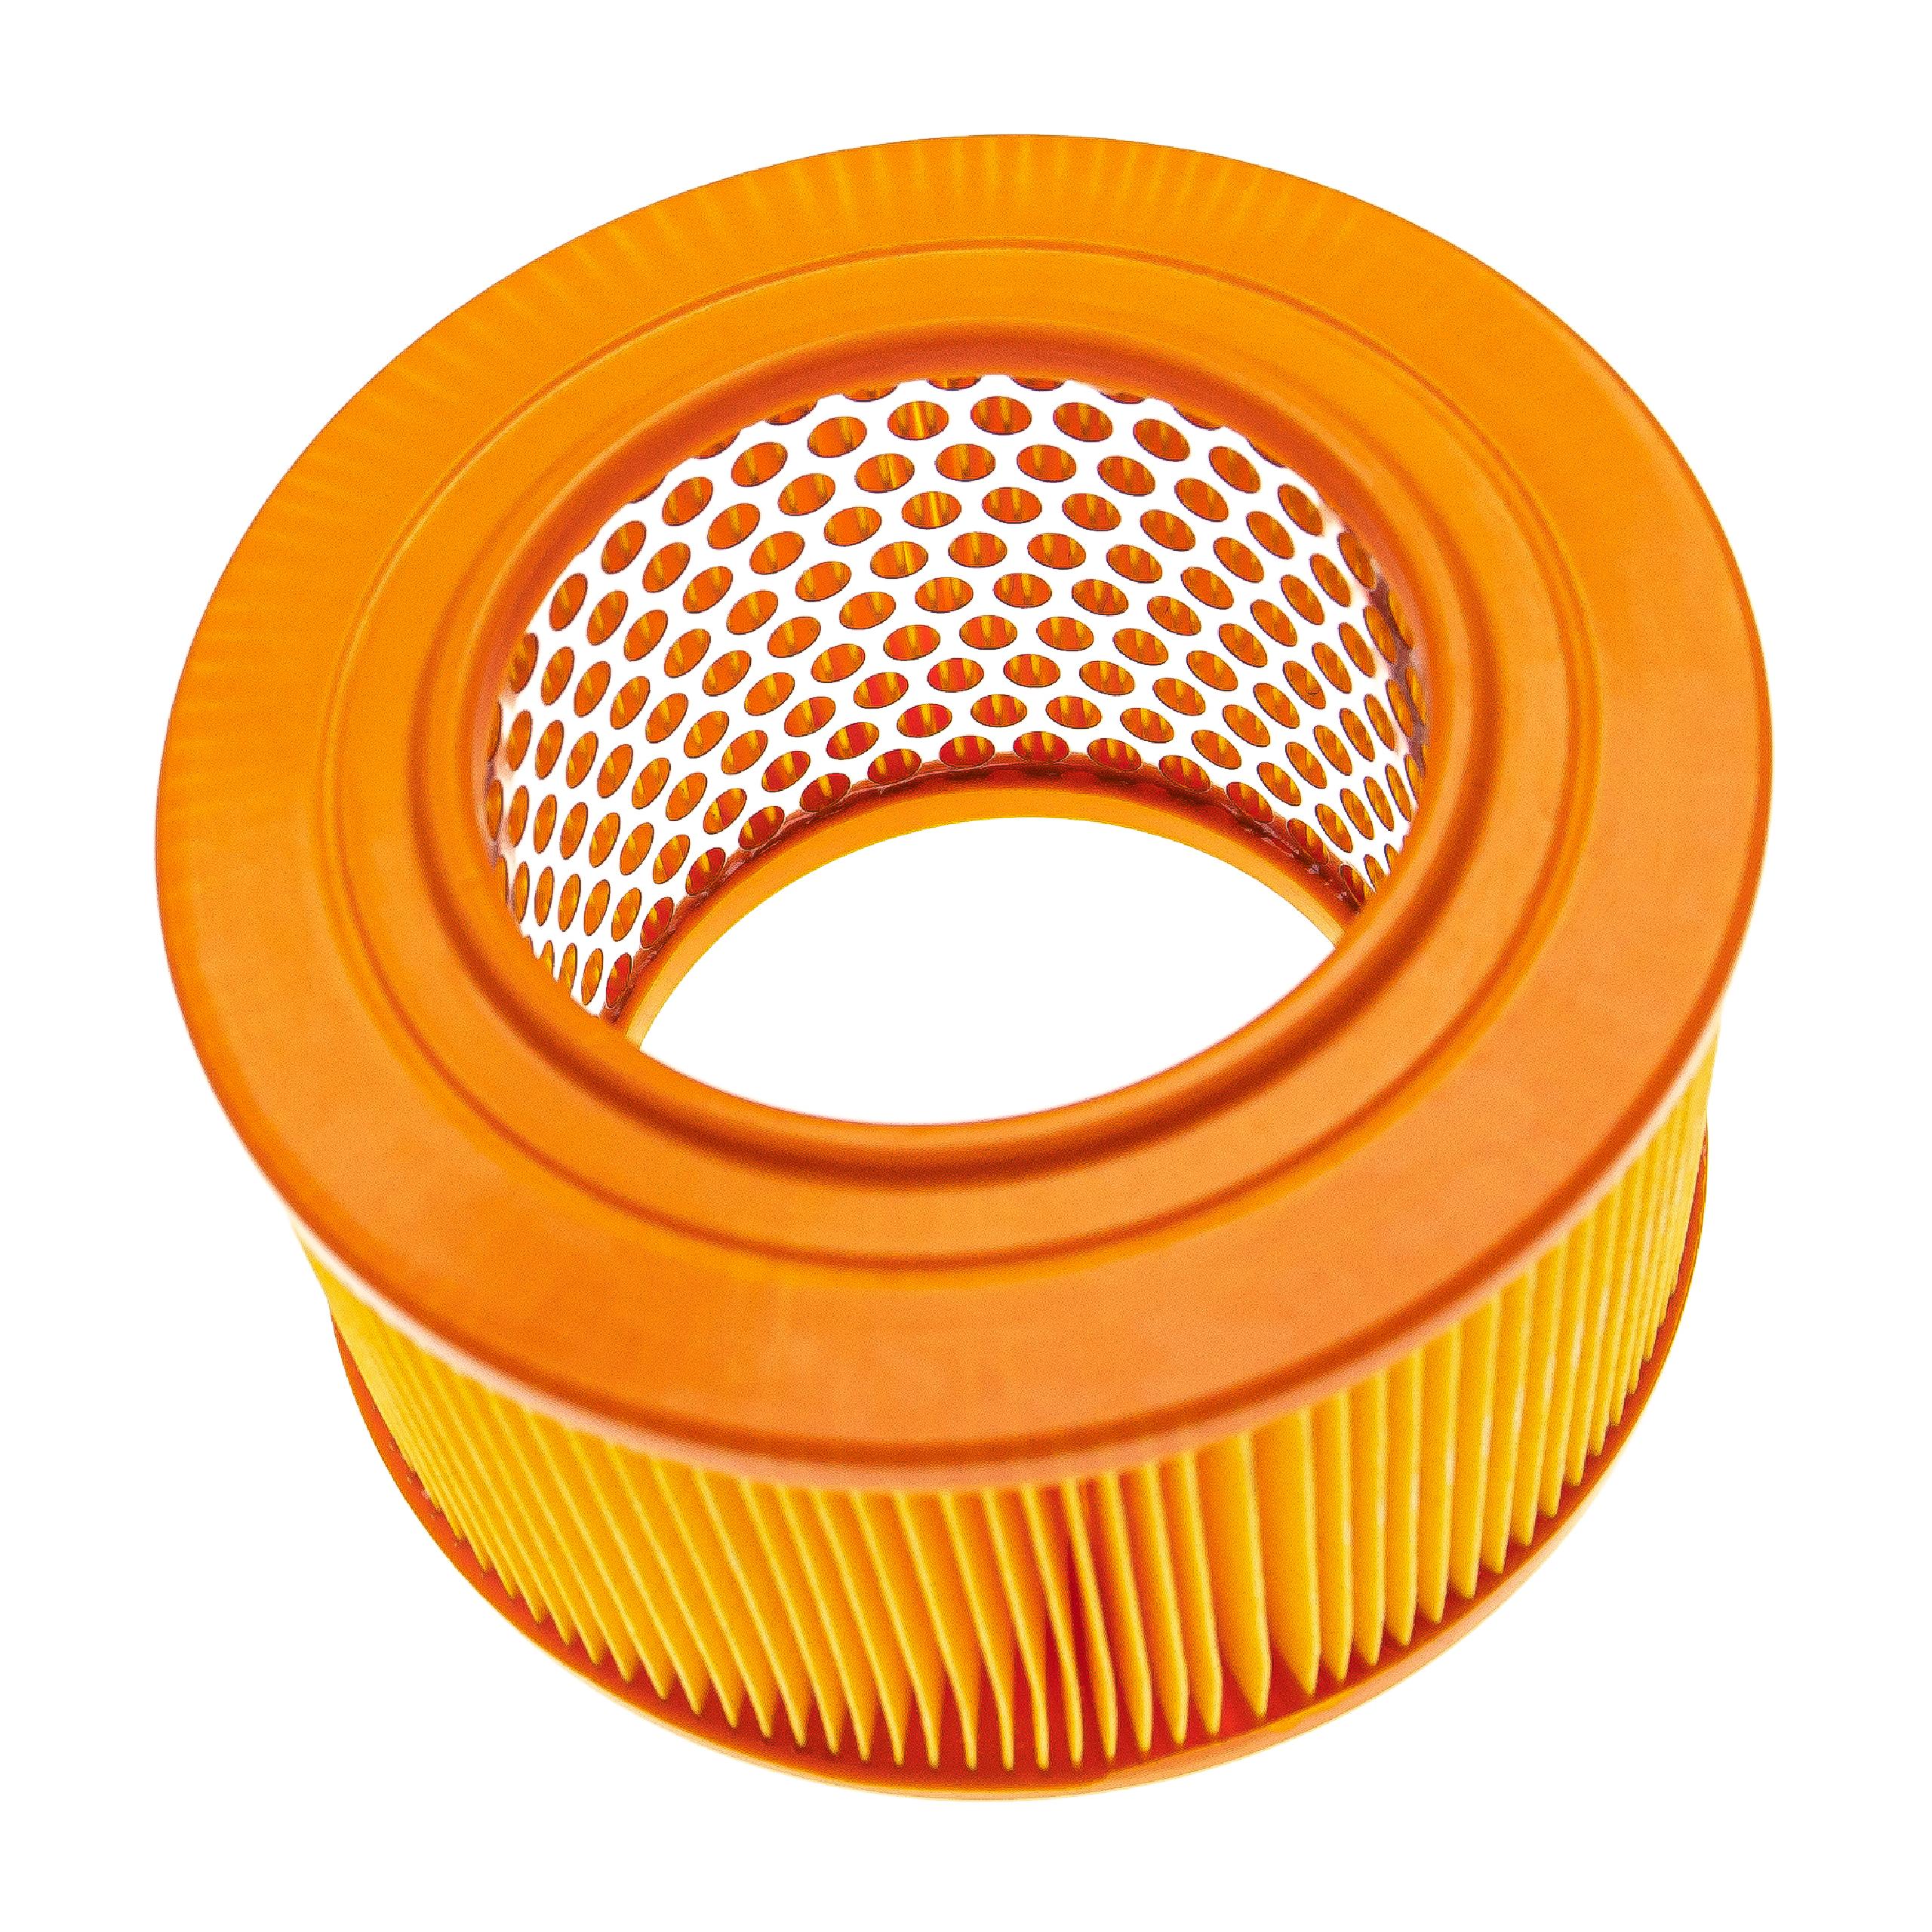 vhbw Filter replacement for Bomag 05727220 for Vibratory Plate, Rammer Compactor